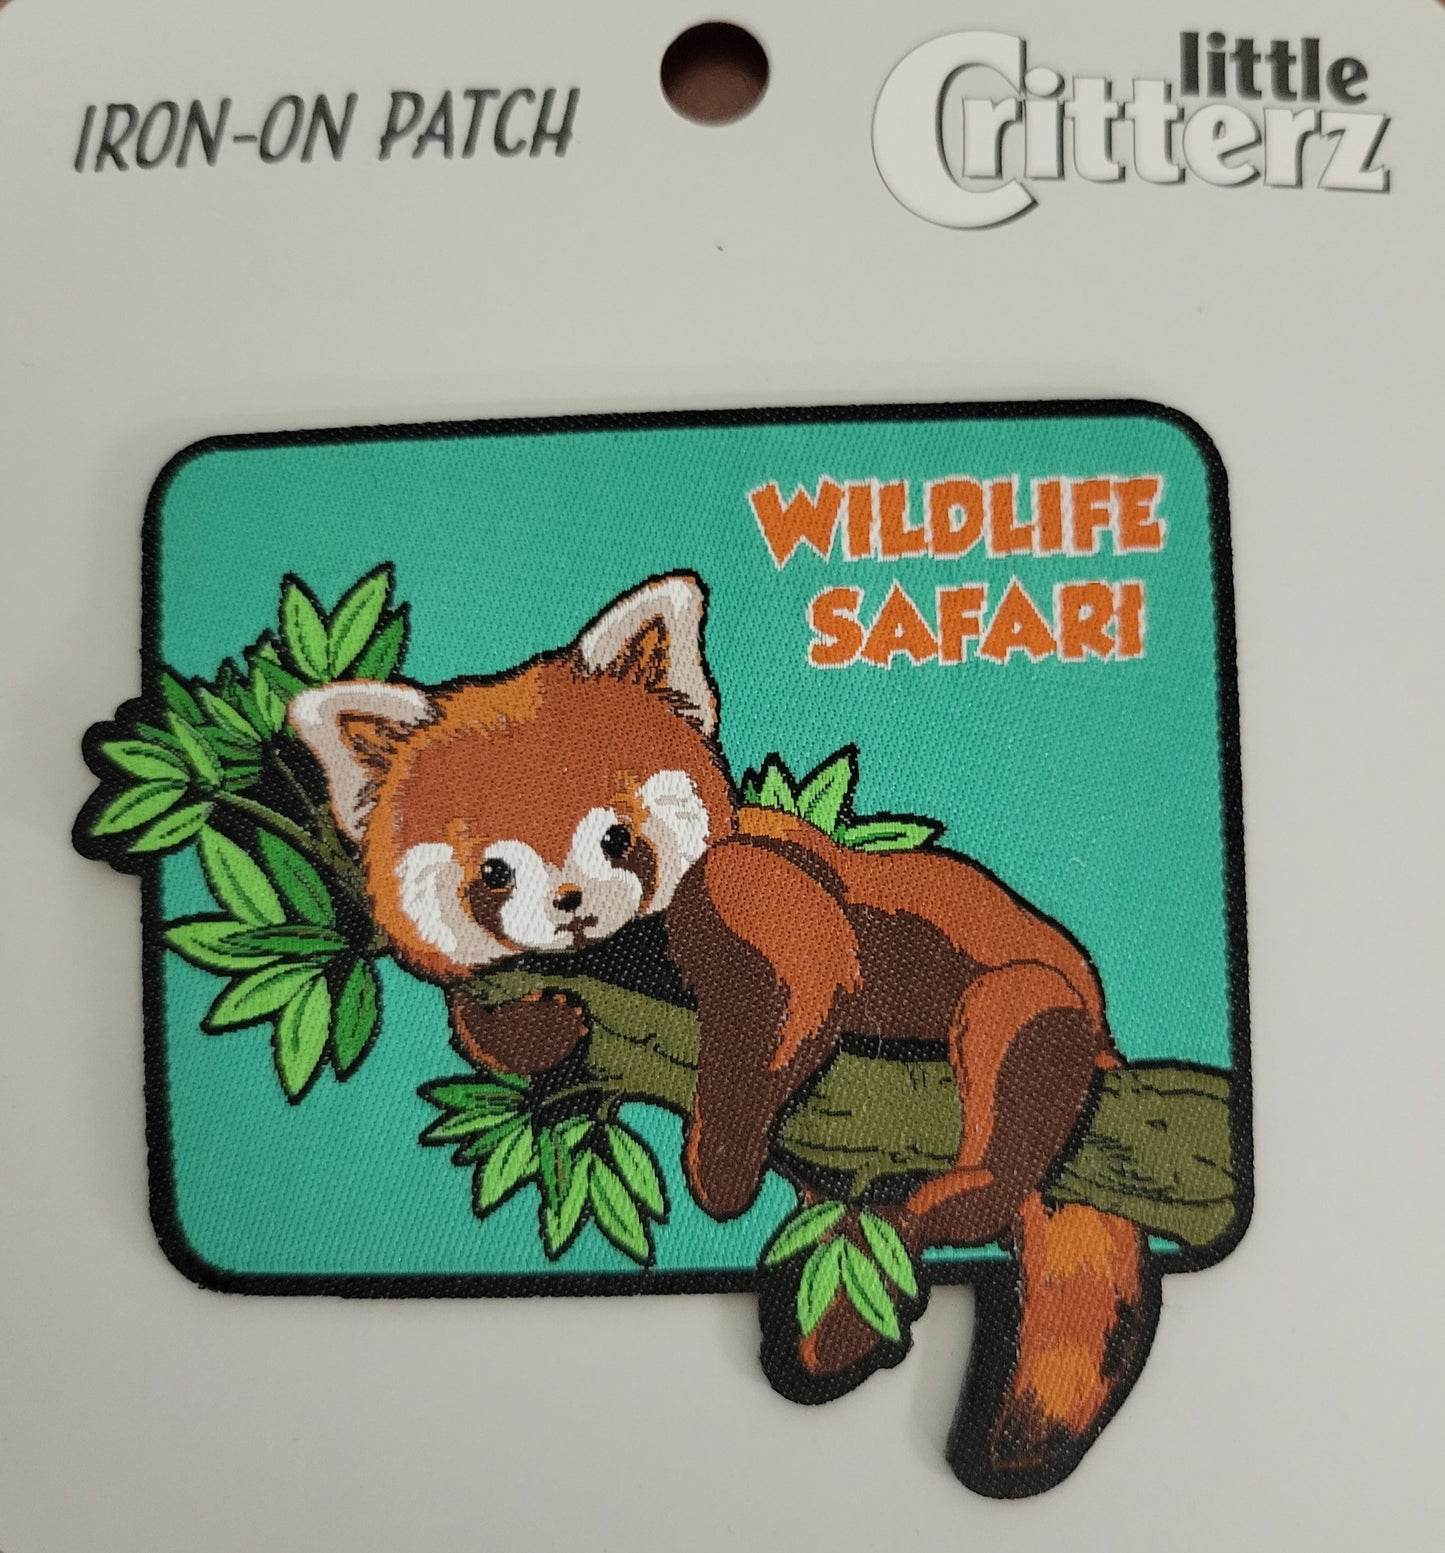 Iron-On Patch - Red Panda